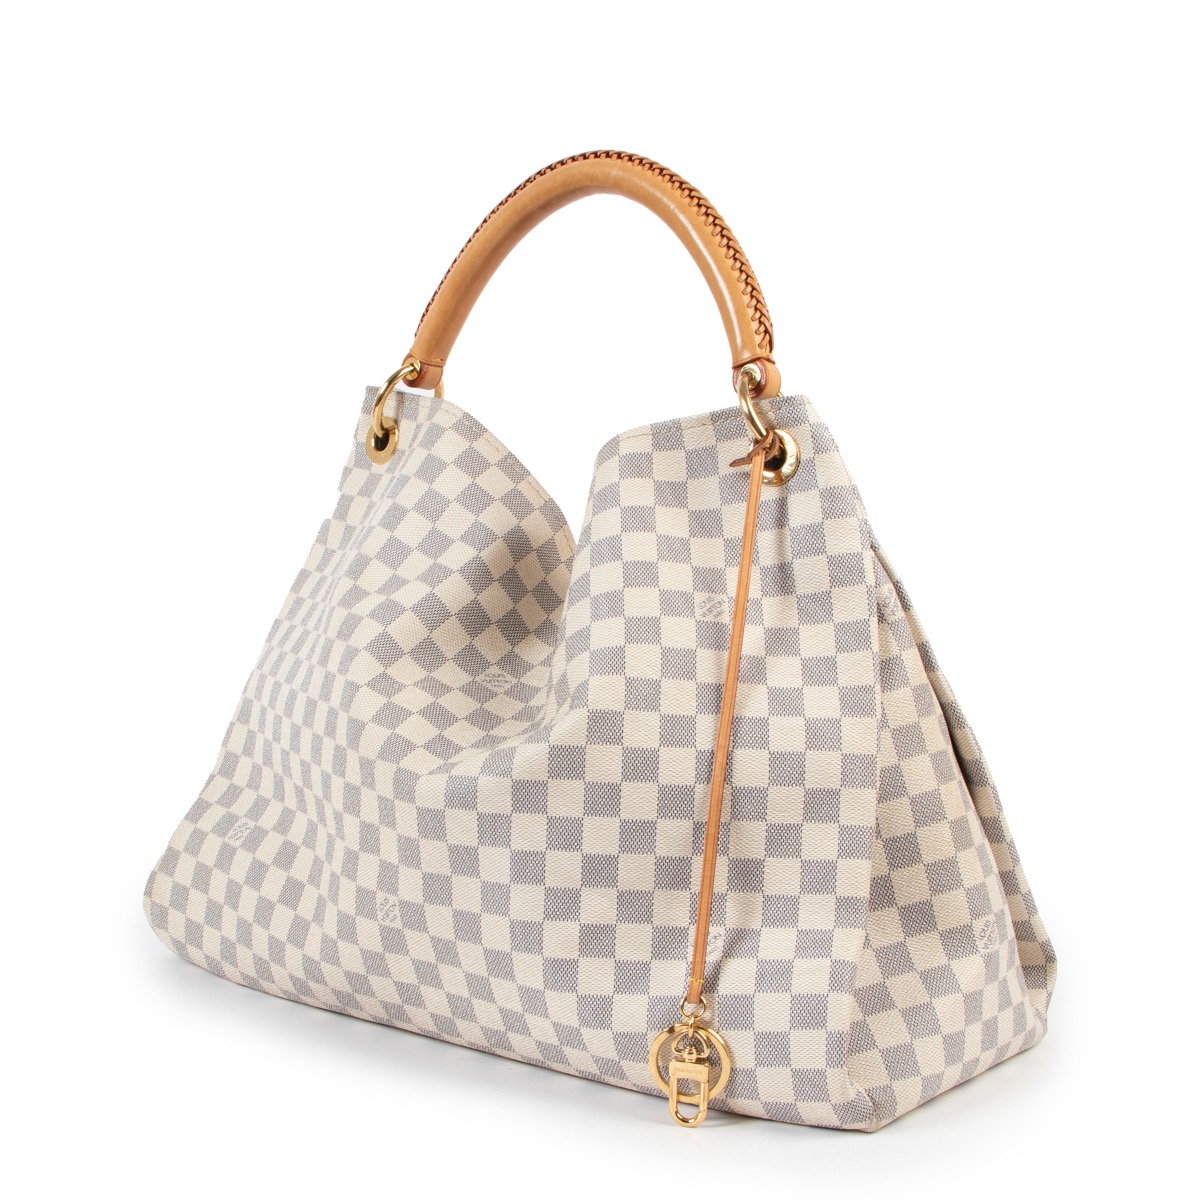 Louis Vuitton Designs Graphic by AMMELUK-DIGITAL PRODUCT · Creative Fabrica